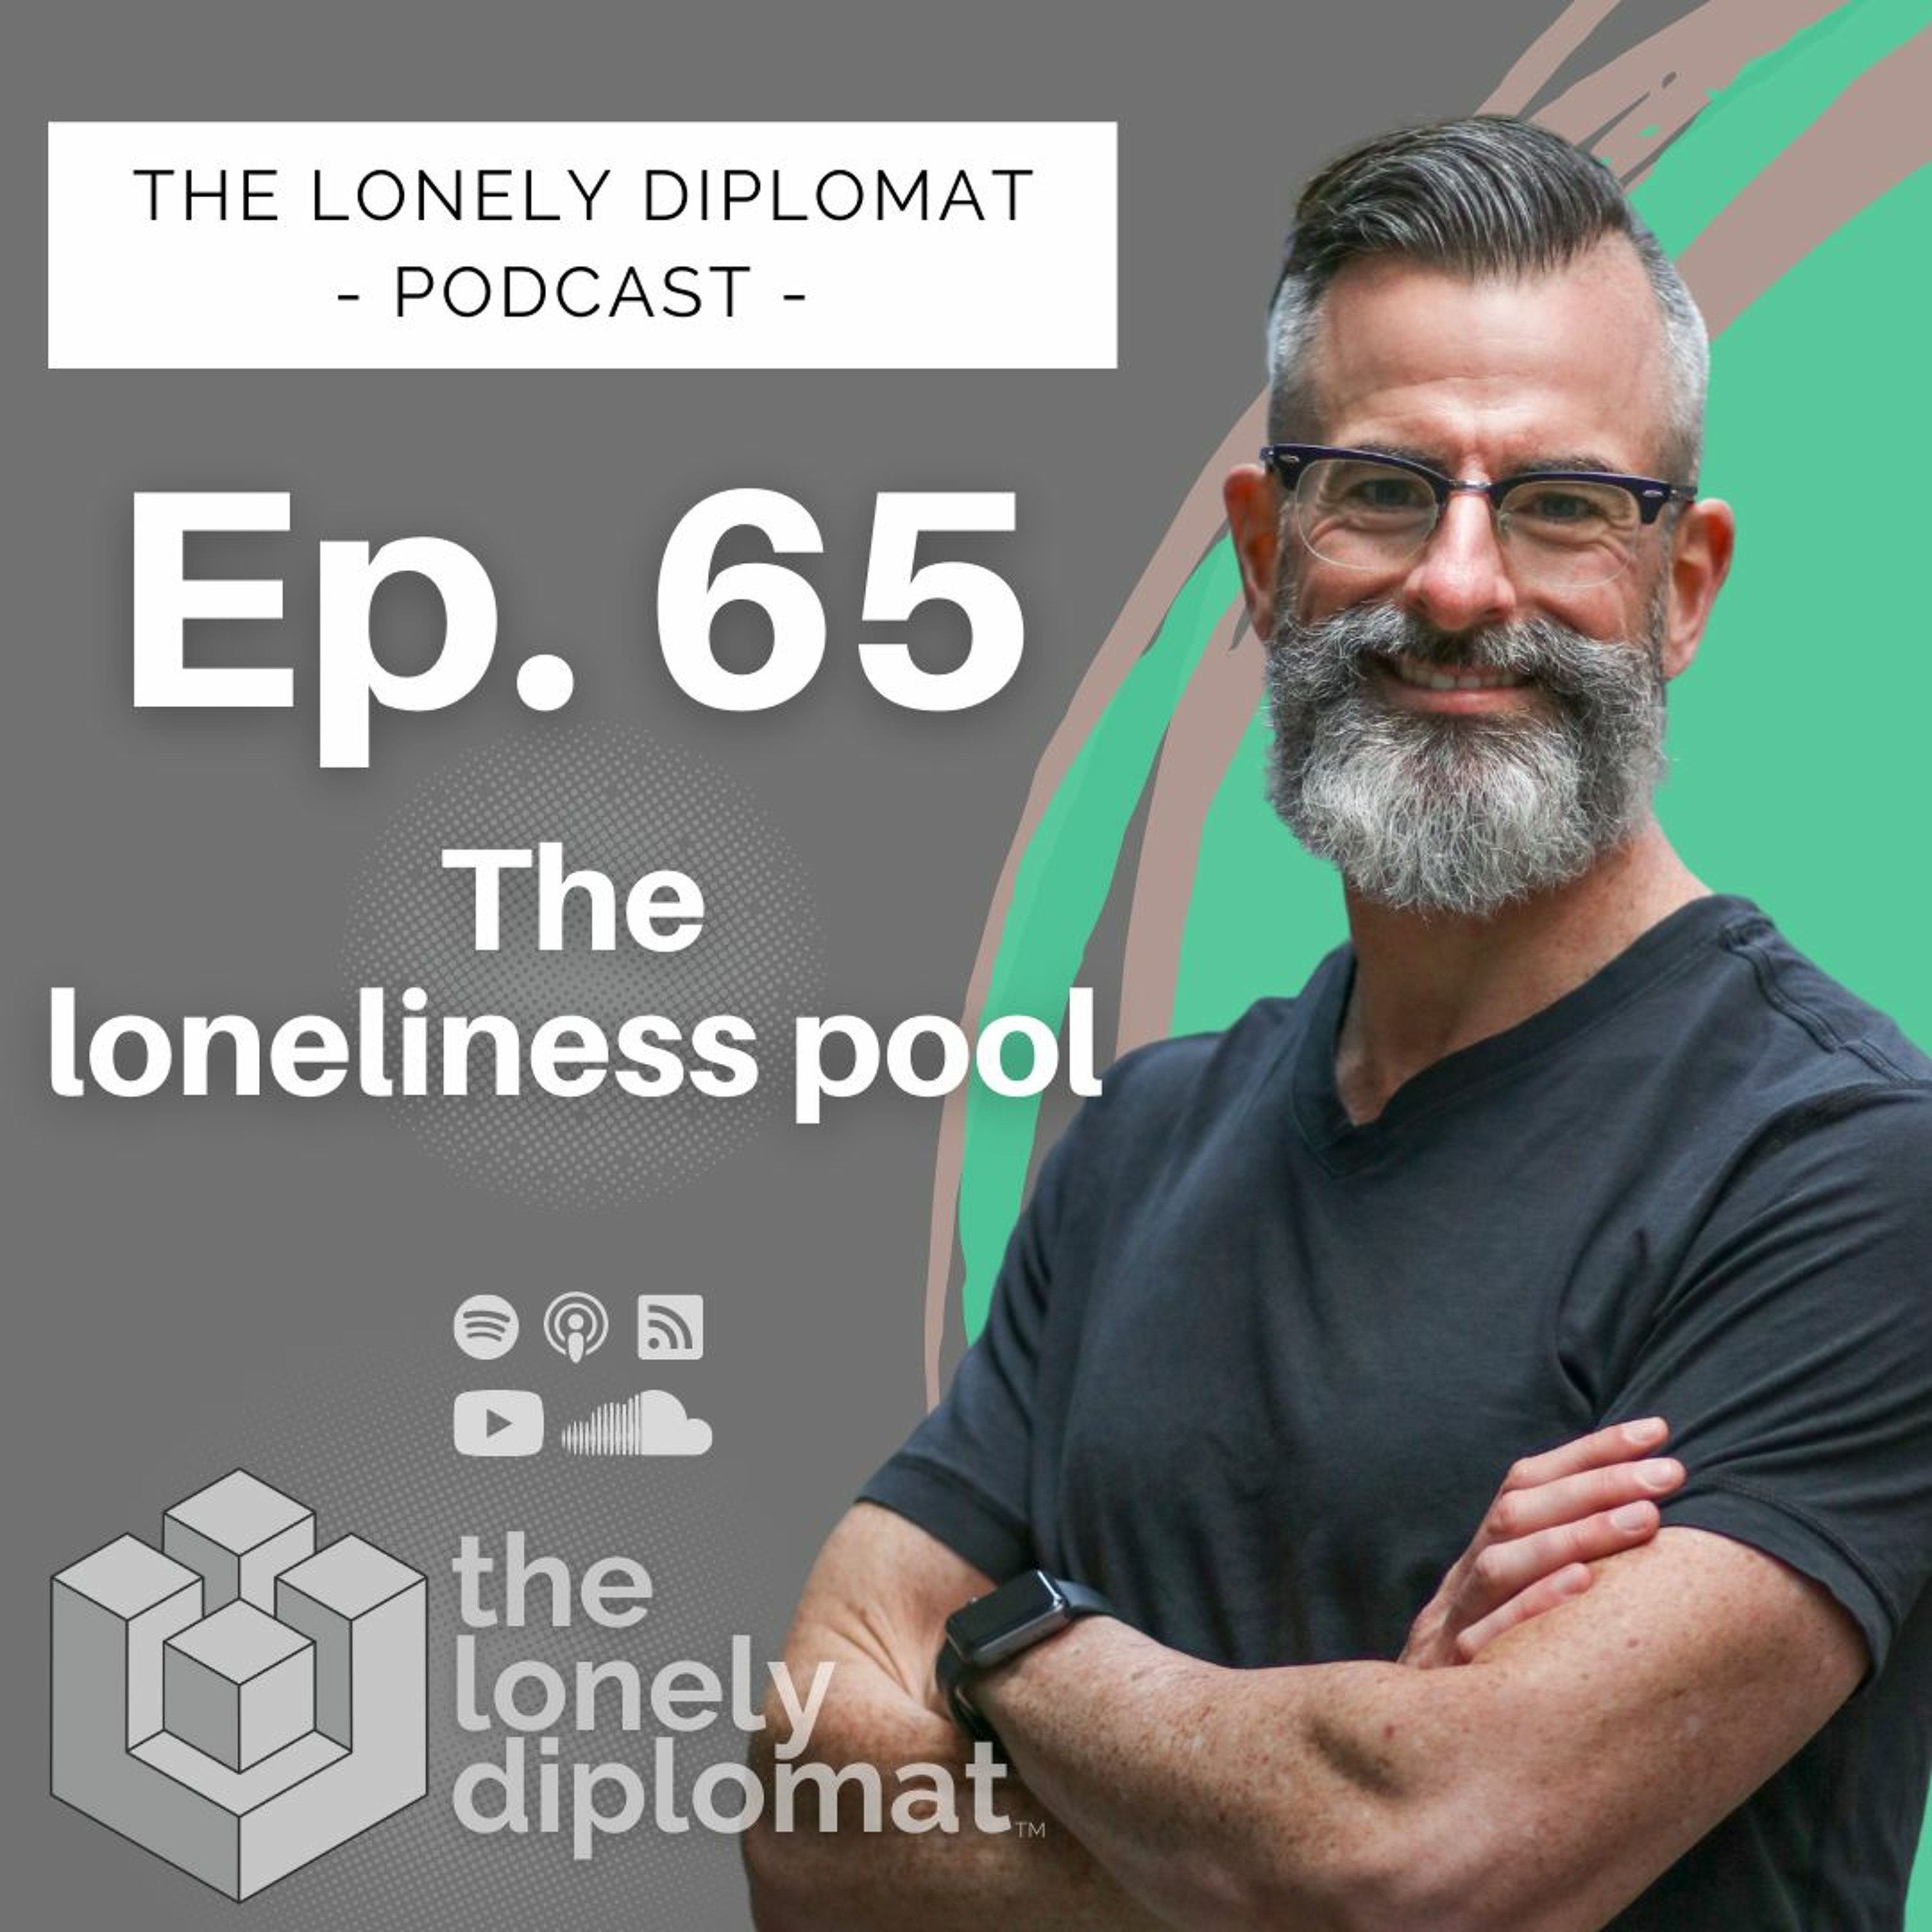 Ep. 65 - The loneliness pool